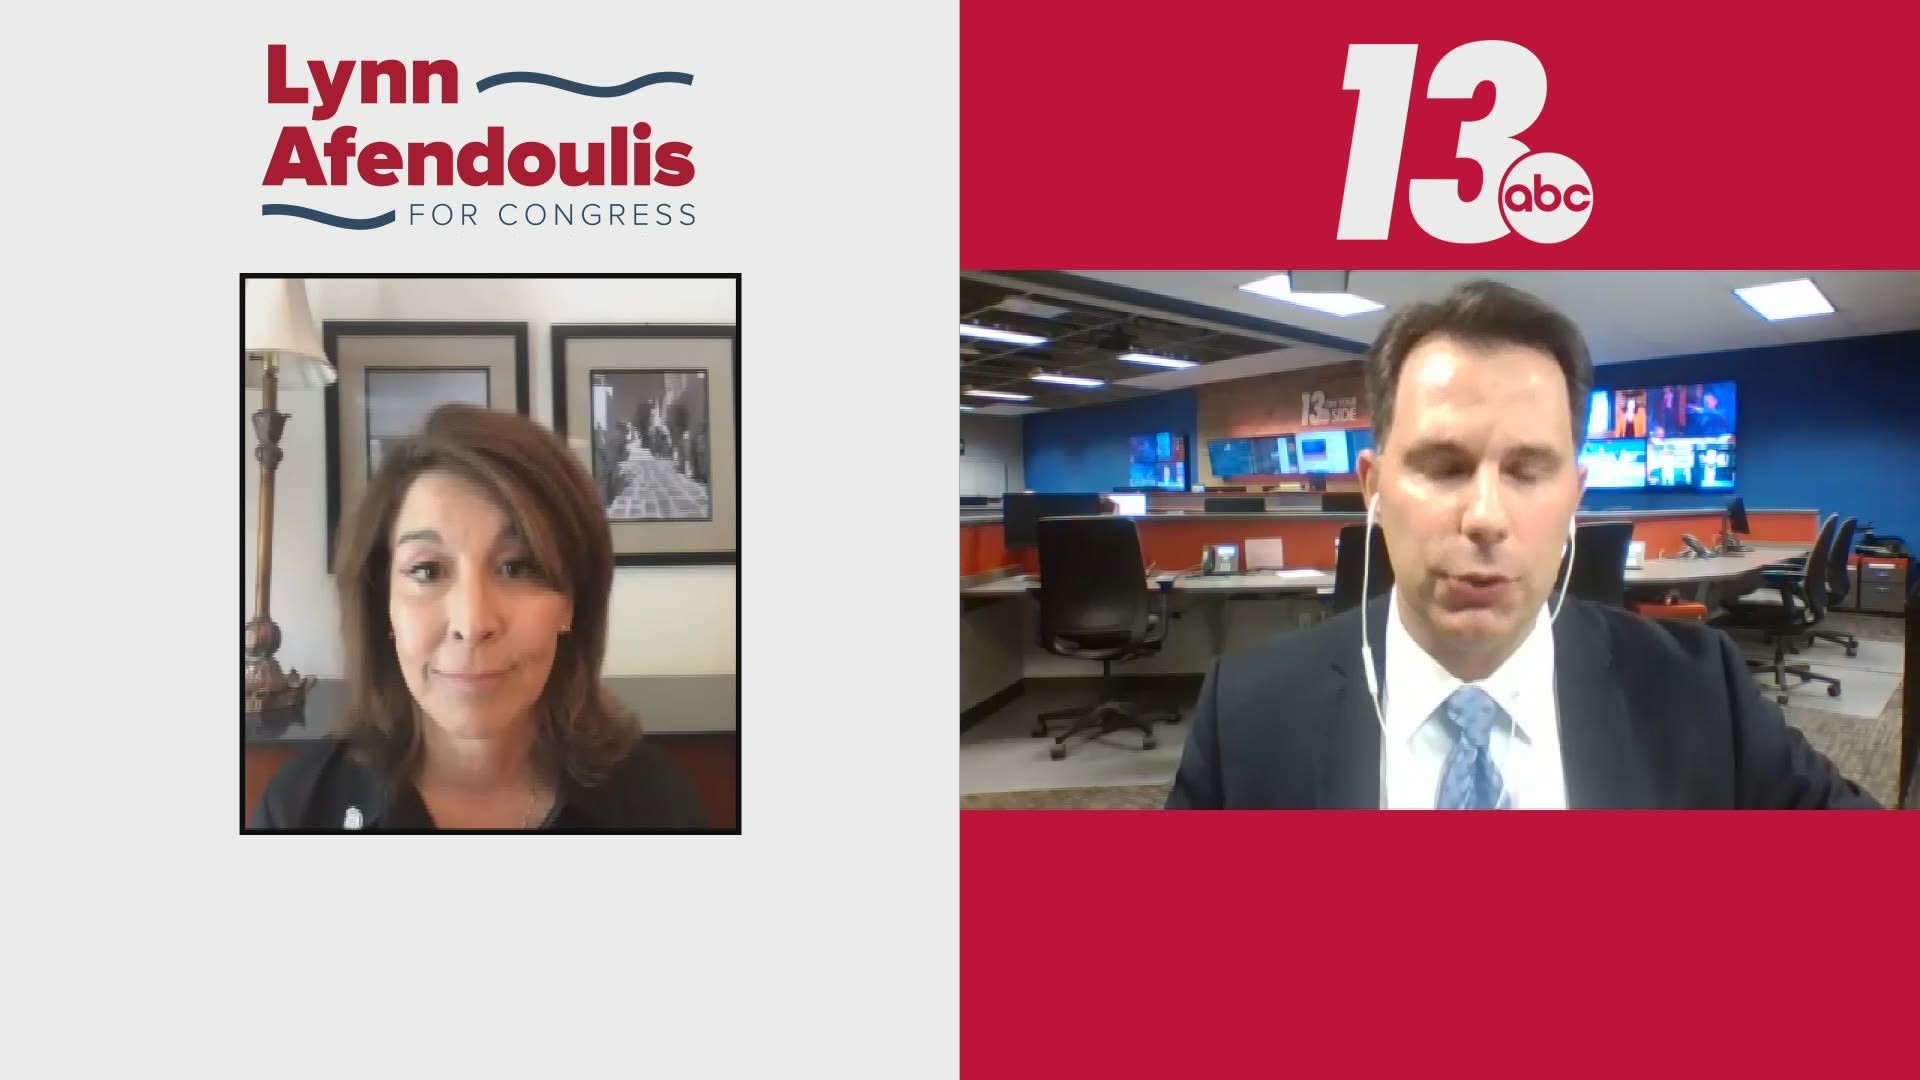 A one-on-one interview with State Rep. Lynn Afendoulis who is running for a seat in the U.S. Congress.